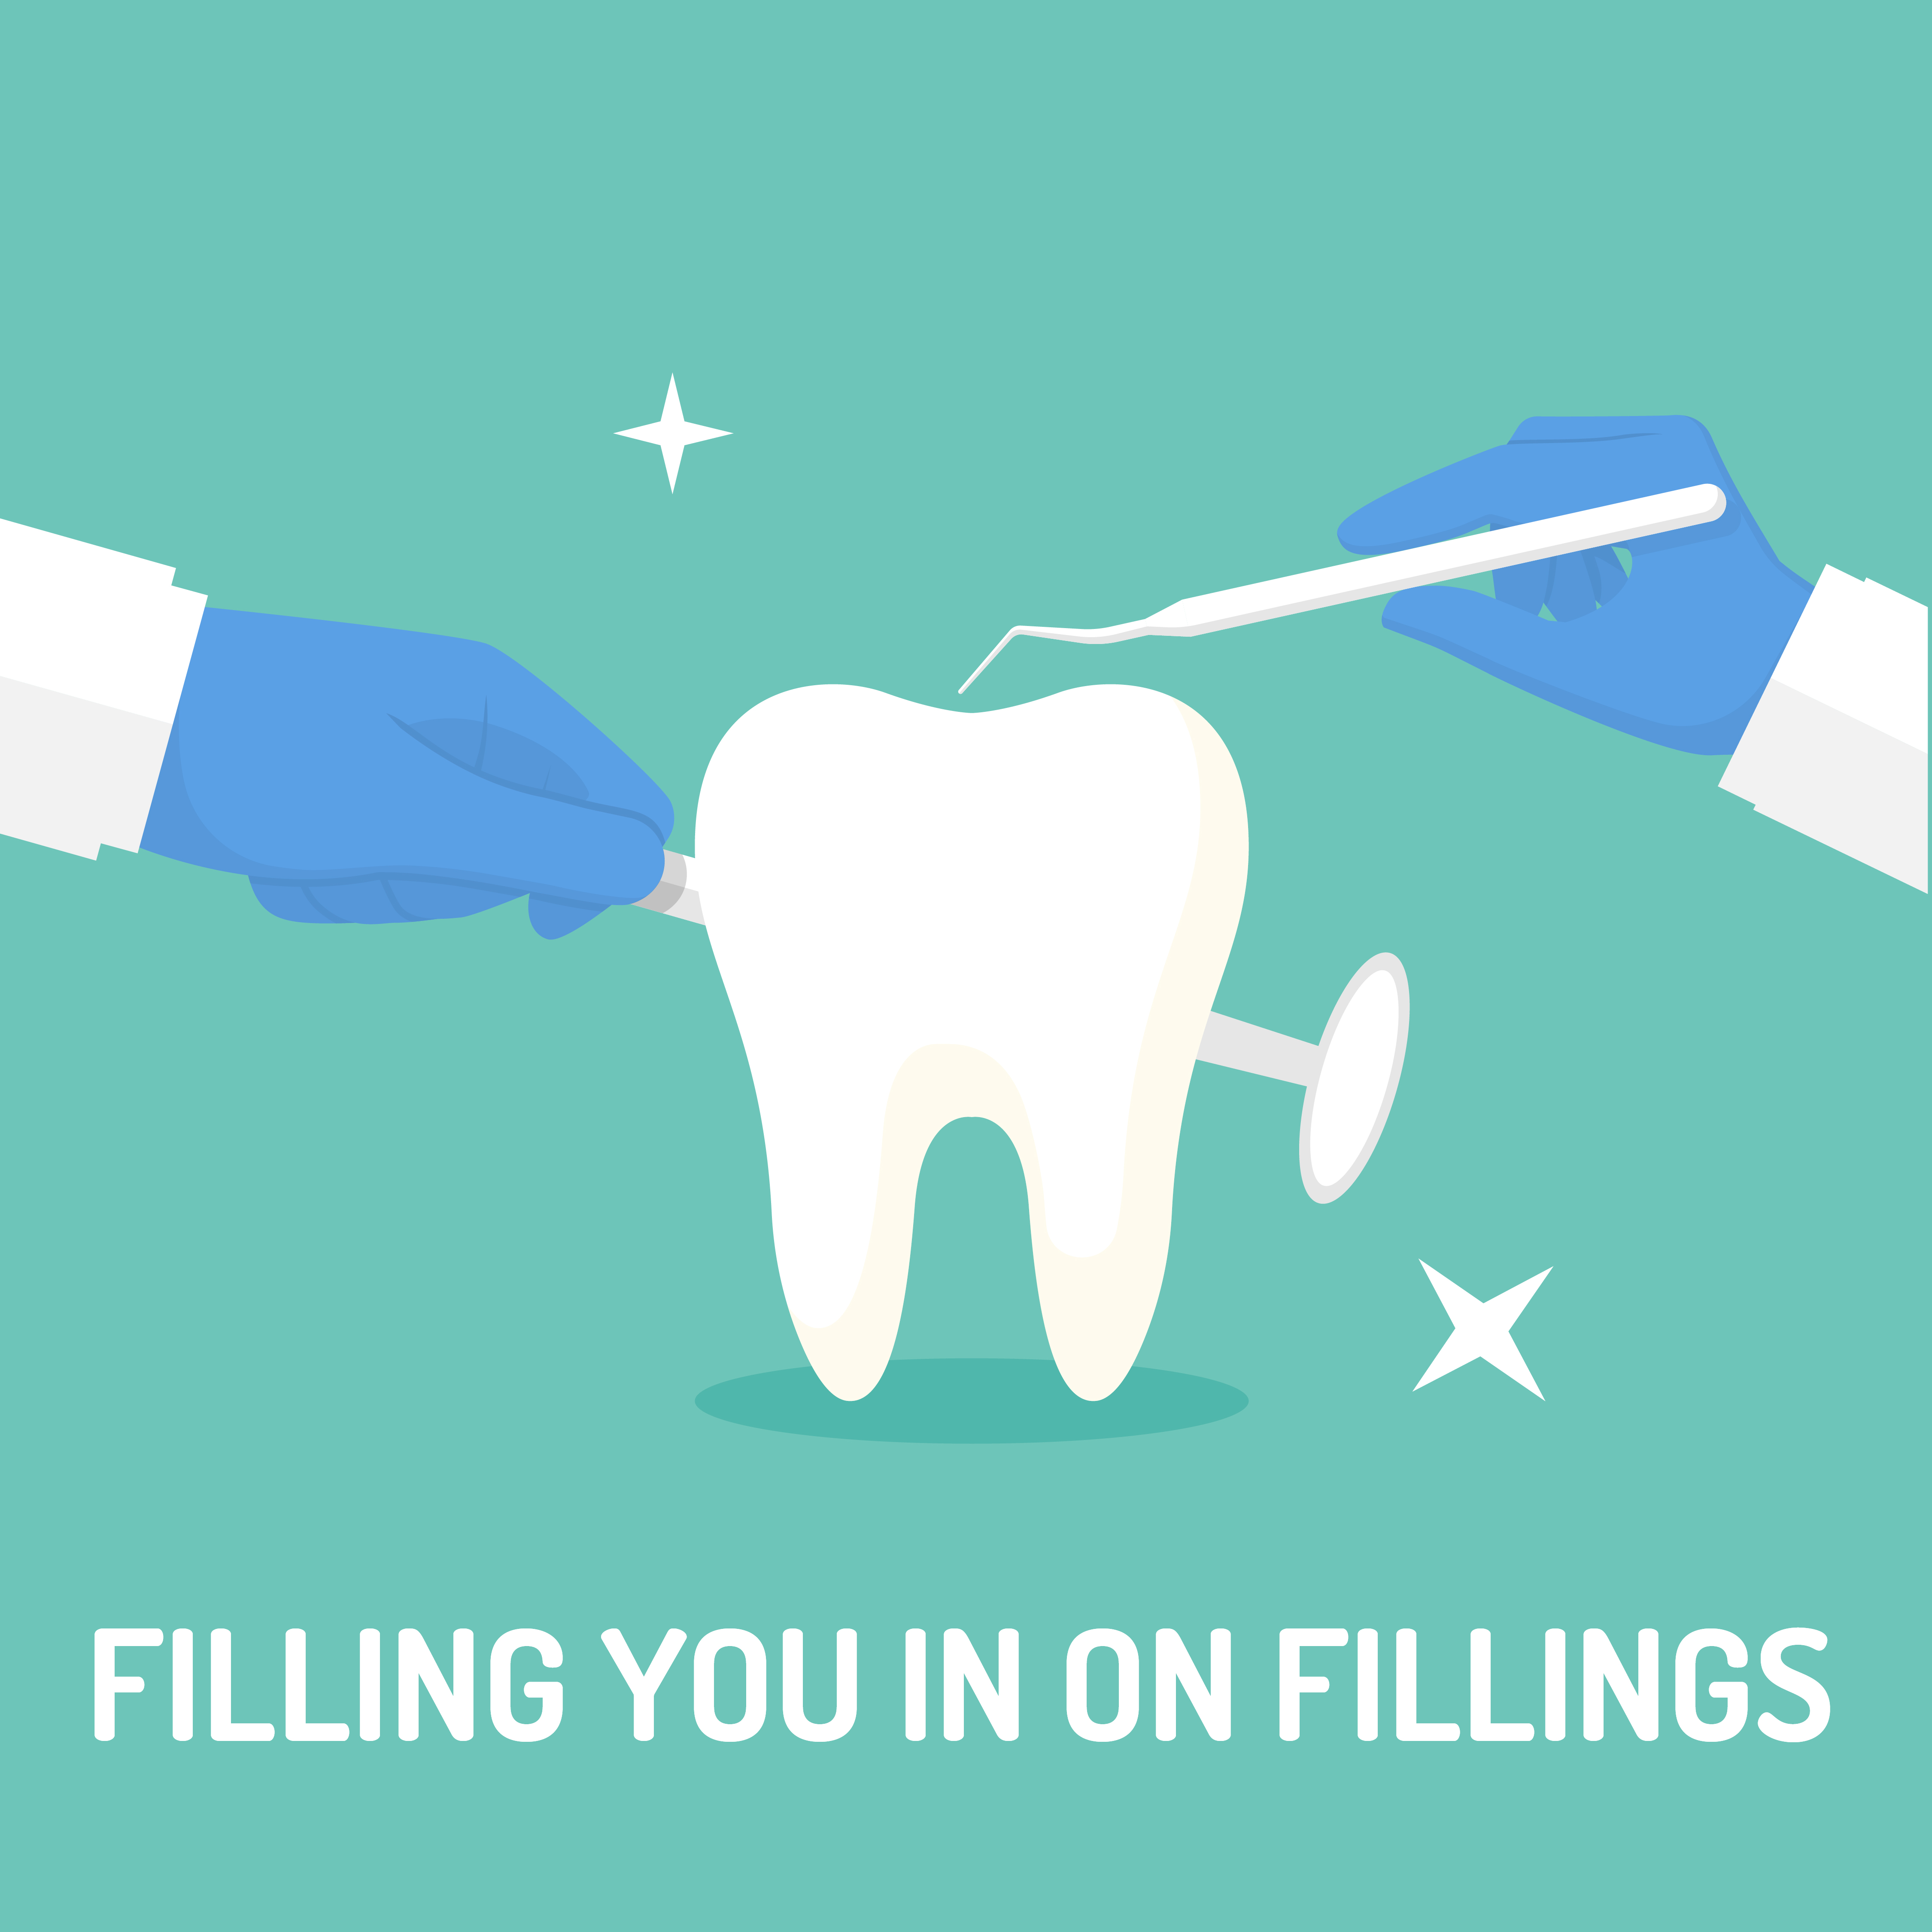 FILLING YOU IN ON FILLINGS